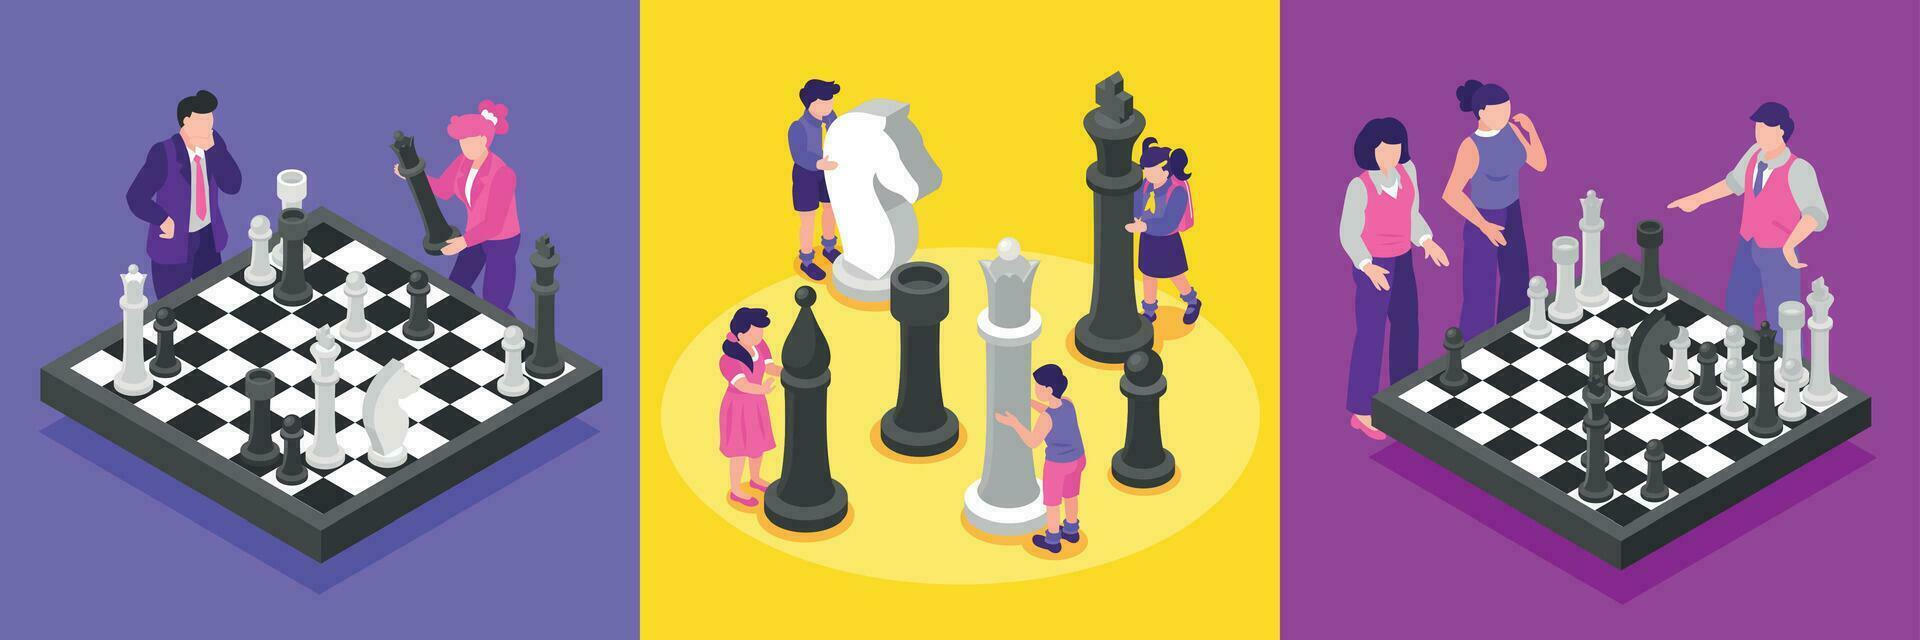 Chess moves with an isometric arrangement of pieces on a wooden